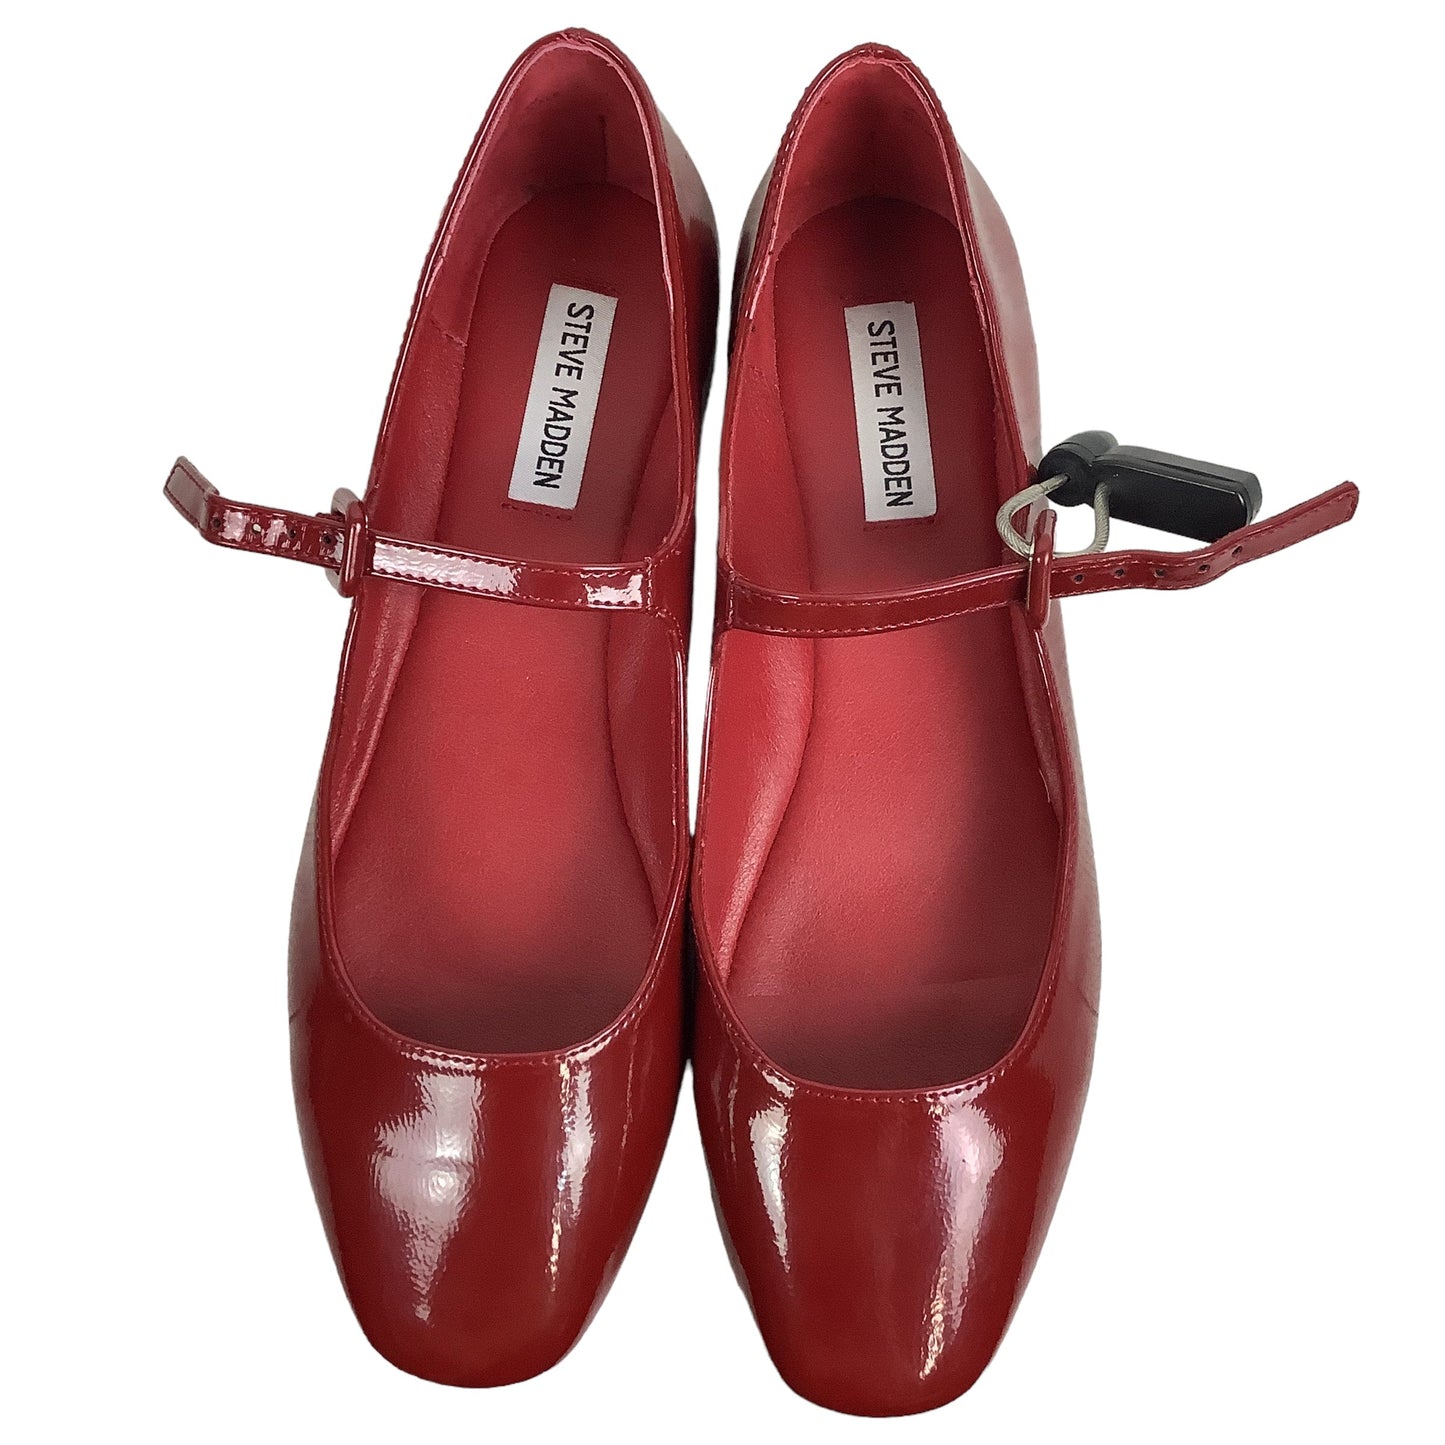 Red Shoes Flats Steve Madden, Size 10.5